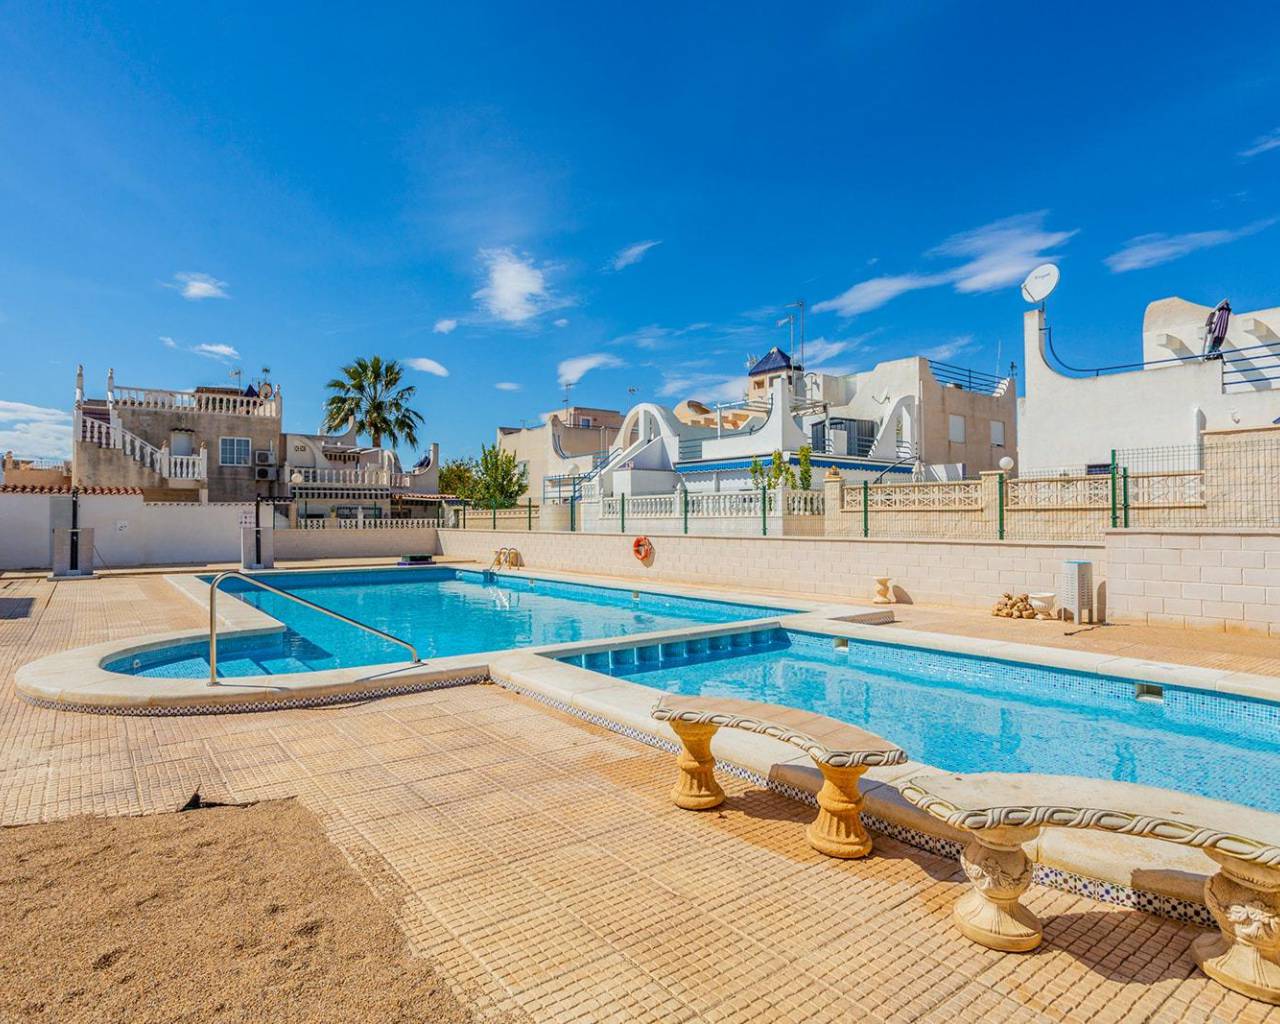 Sale - Single family house - Torrevieja - Doña ines